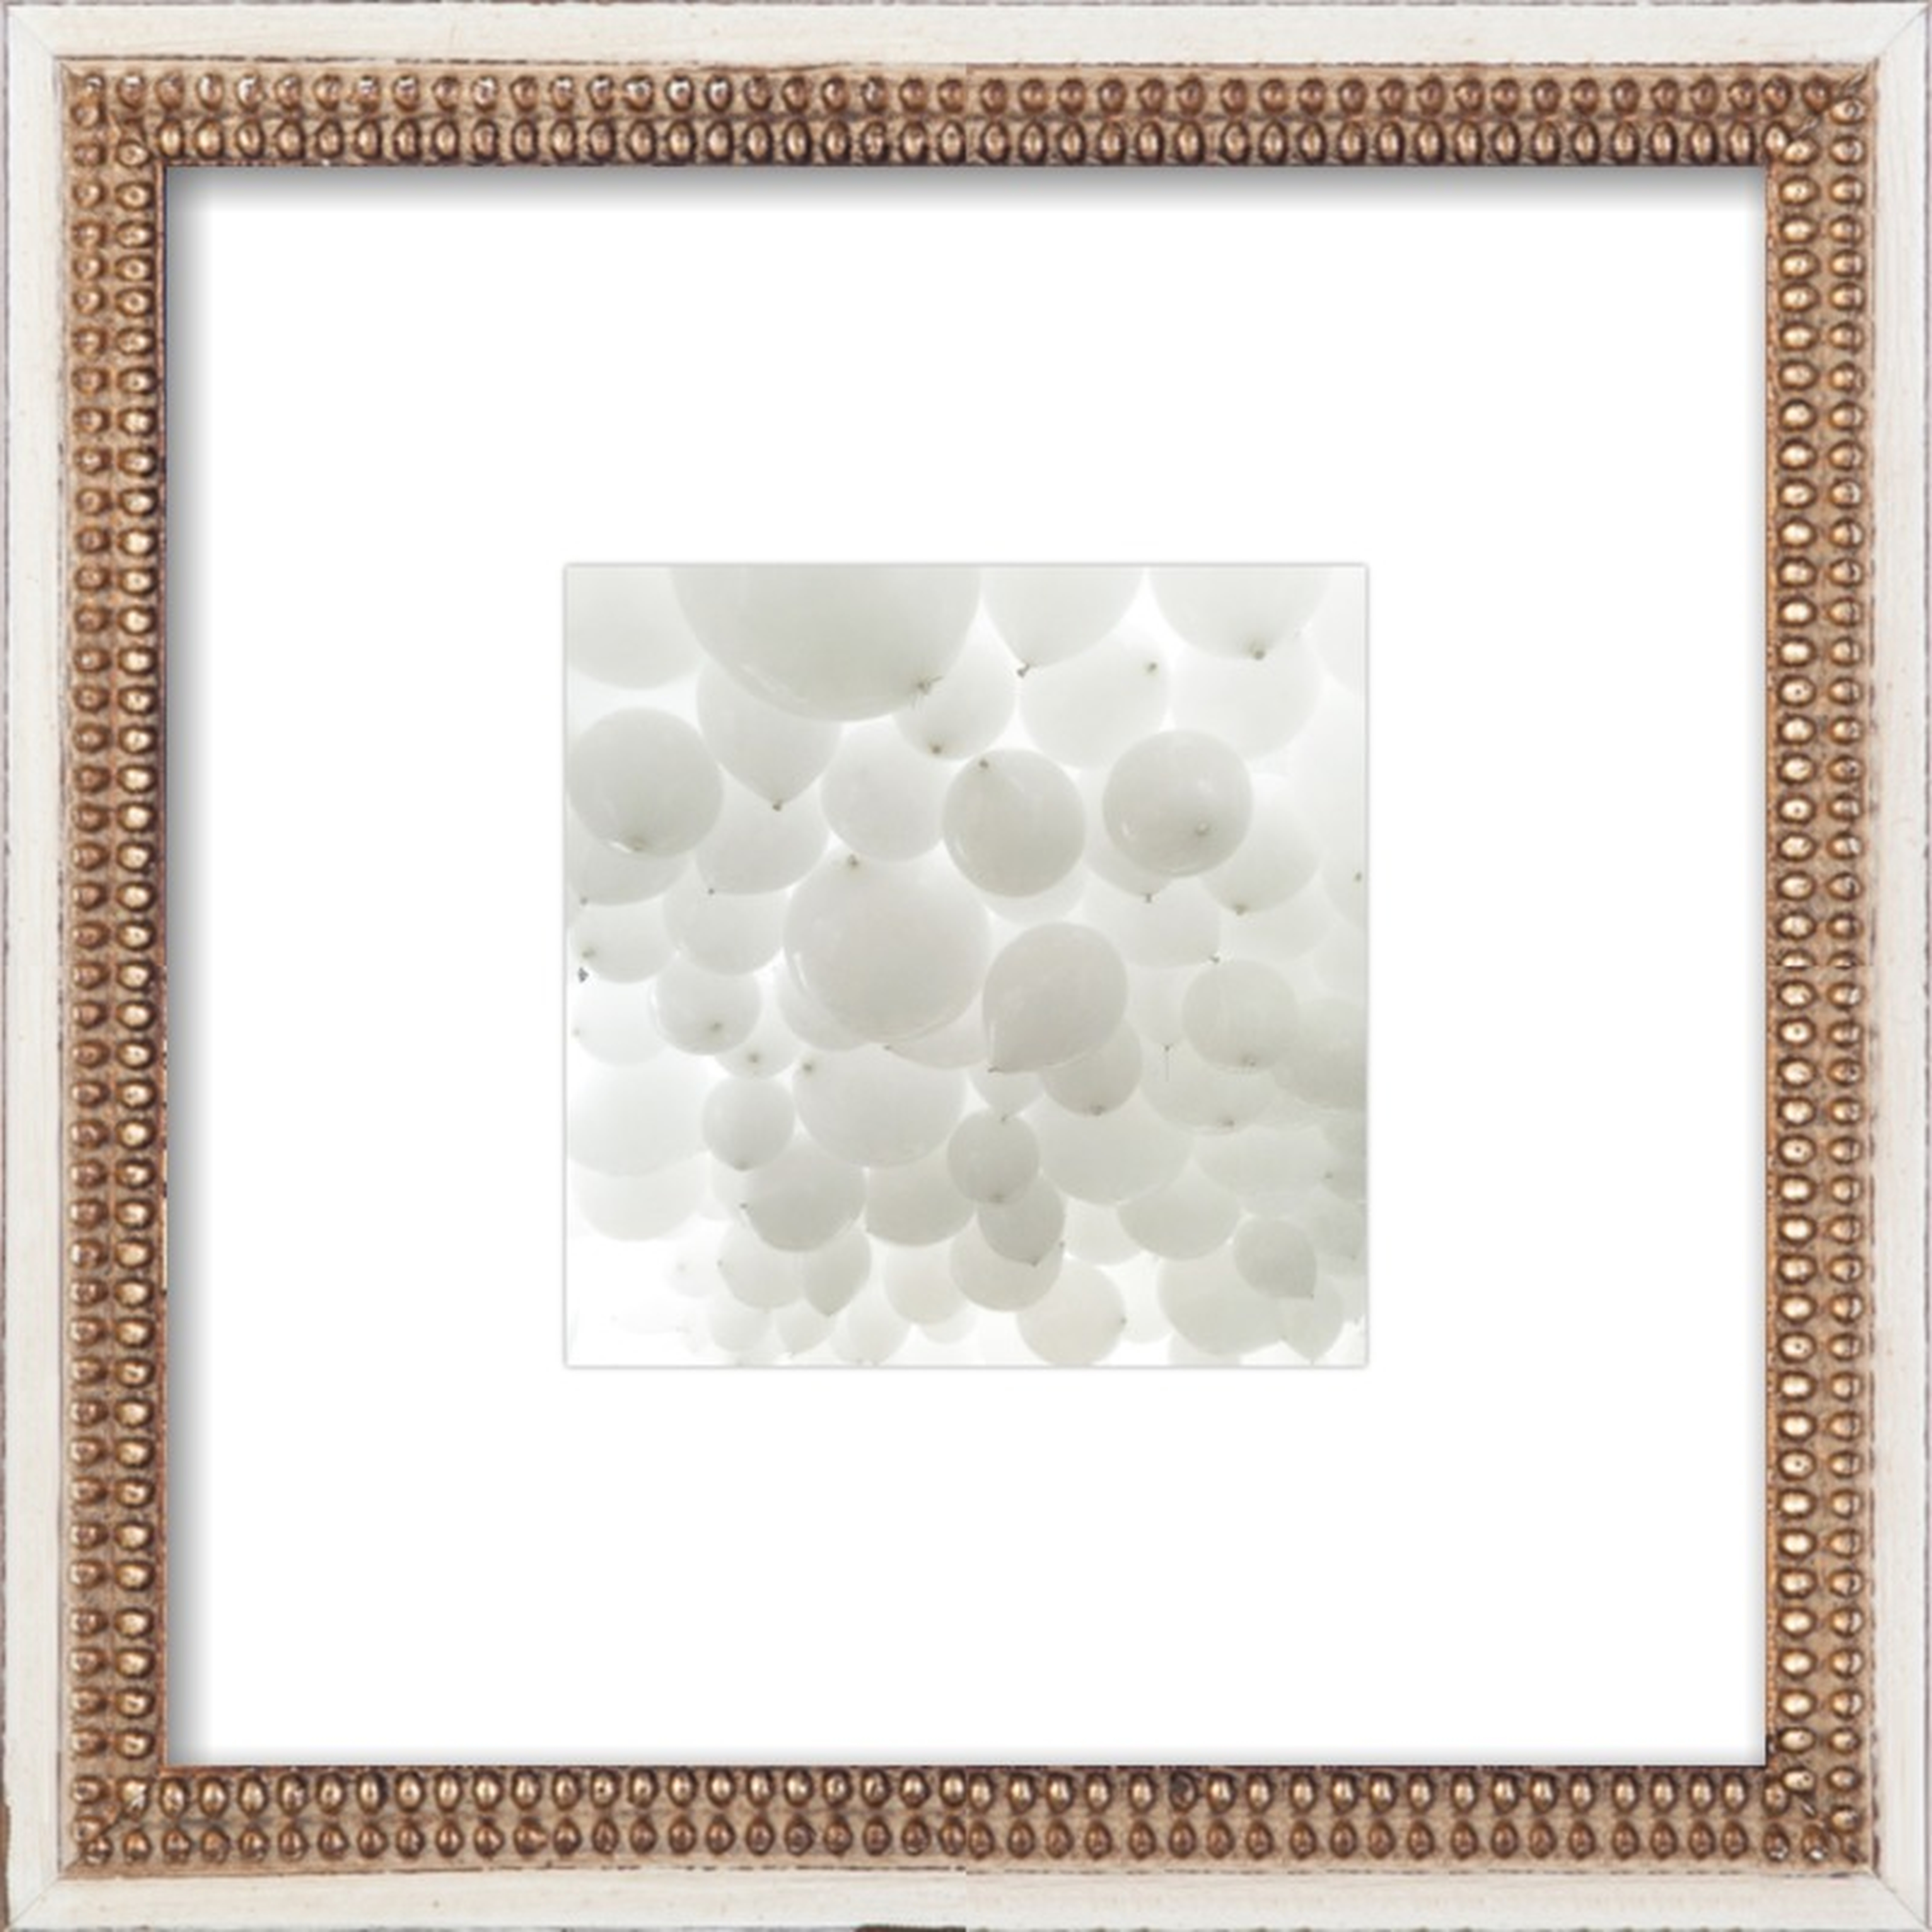 All White - 8" x 8" - Distressed cream double bead wood Frame with Mat - Artfully Walls